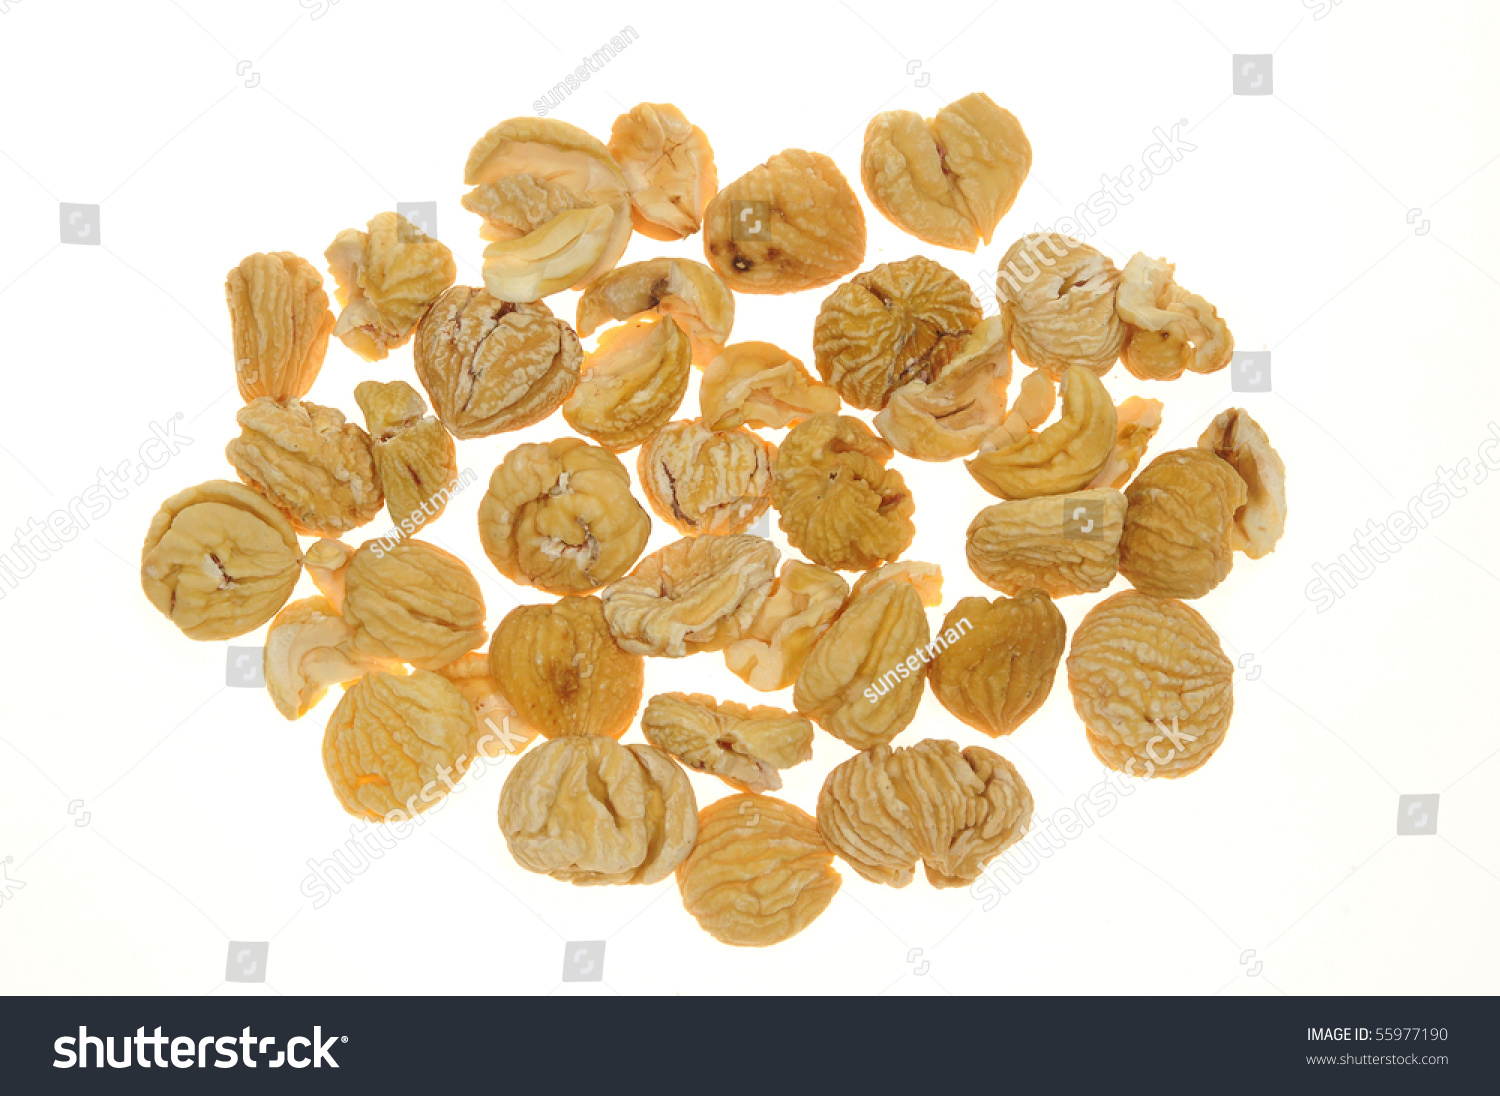 Dried Water Chestnuts On White Background Stock Photo 55977190 ...